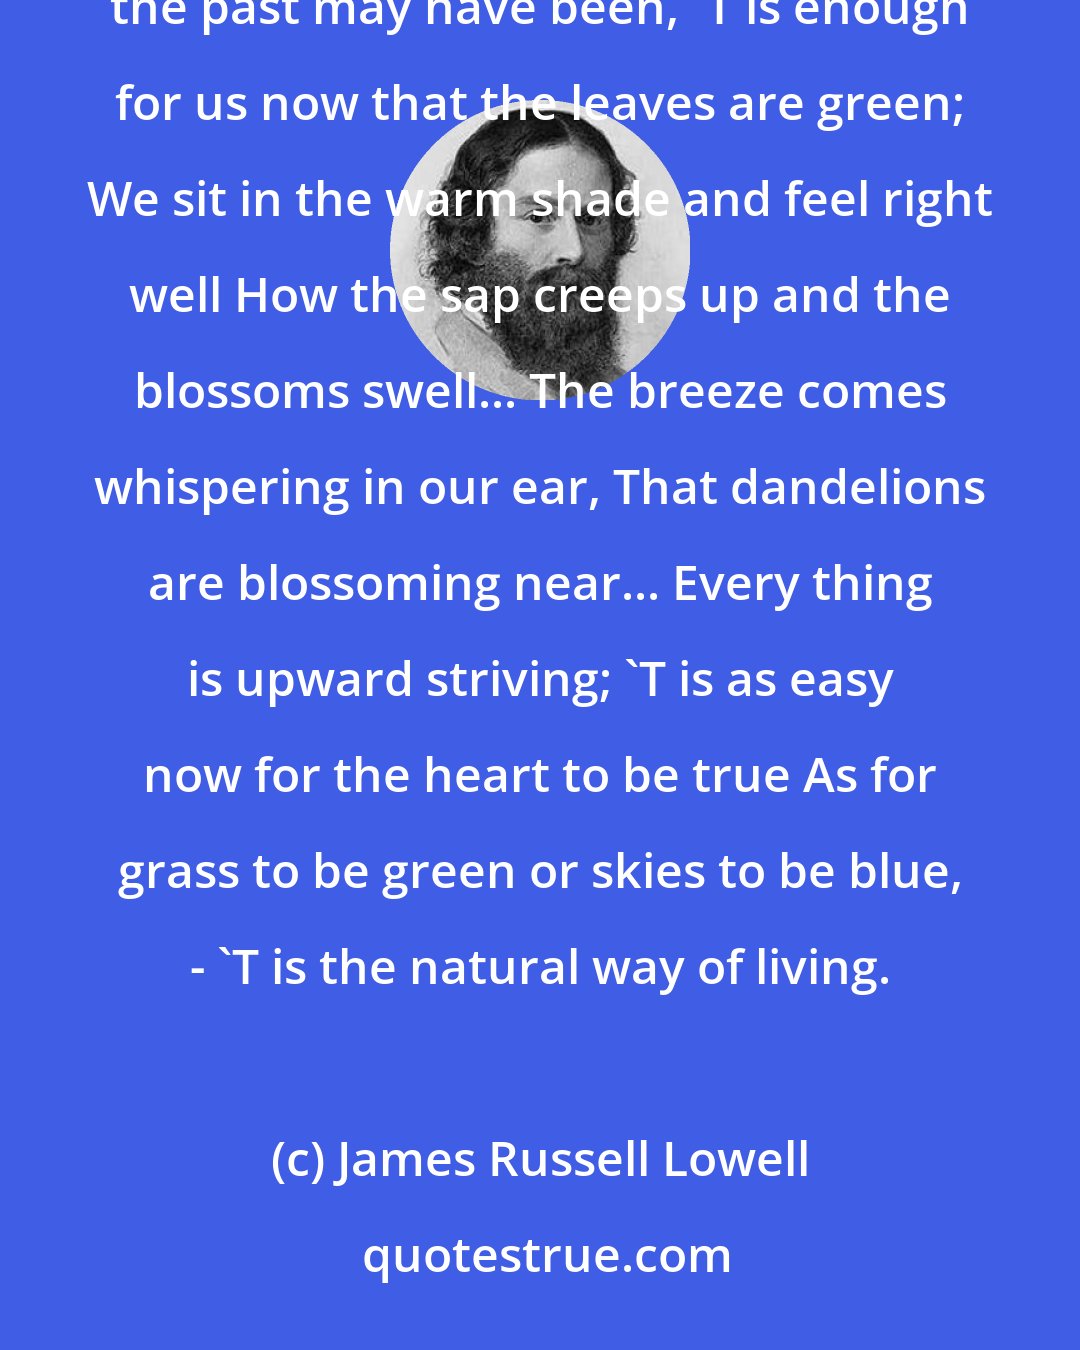 James Russell Lowell: Now the heart is so full that a drop overfills it, We are happy now because God so wills it; No matter how barren the past may have been, 'T is enough for us now that the leaves are green; We sit in the warm shade and feel right well How the sap creeps up and the blossoms swell... The breeze comes whispering in our ear, That dandelions are blossoming near... Every thing is upward striving; 'T is as easy now for the heart to be true As for grass to be green or skies to be blue, - 'T is the natural way of living.